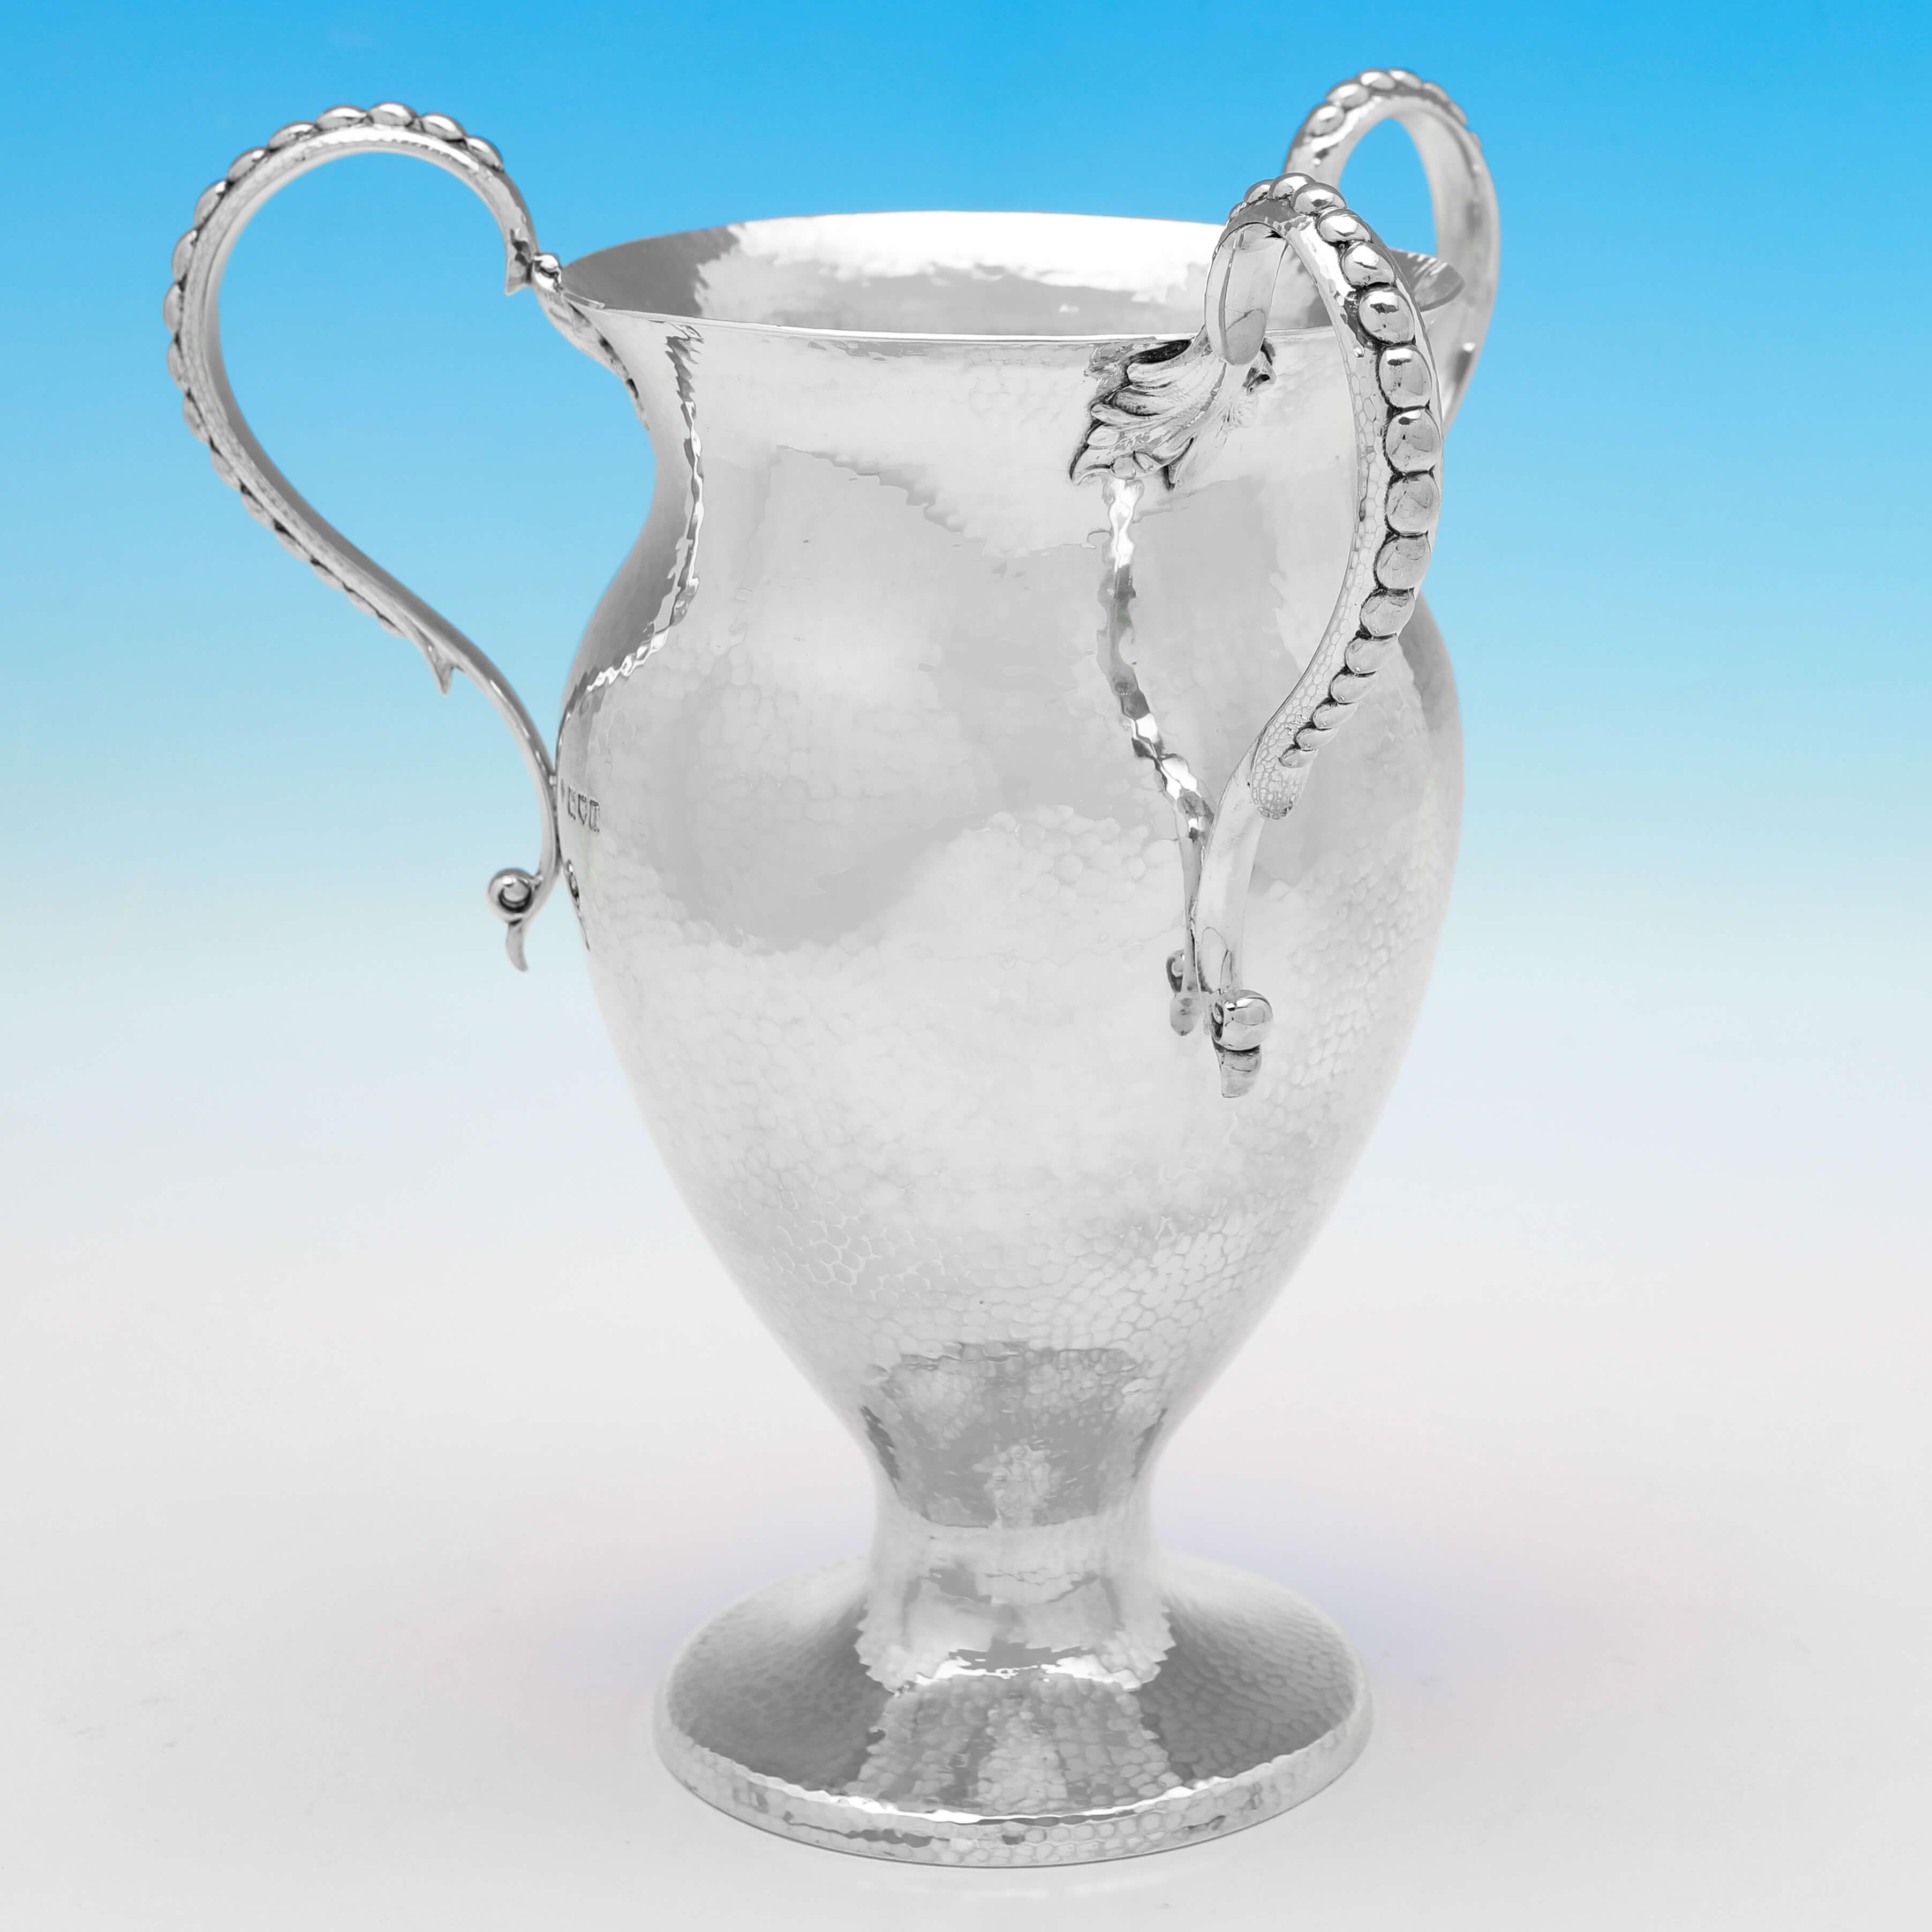 Hallmarked in London in 1910 by Holland, Aldwinckle & Slater, this stylish, Antique Sterling Silver Three-handled Cup or Tyg, is in the Art Nouveau taste, with a hammered finish, and vacant cartouche to one side. 

The cup measures 10